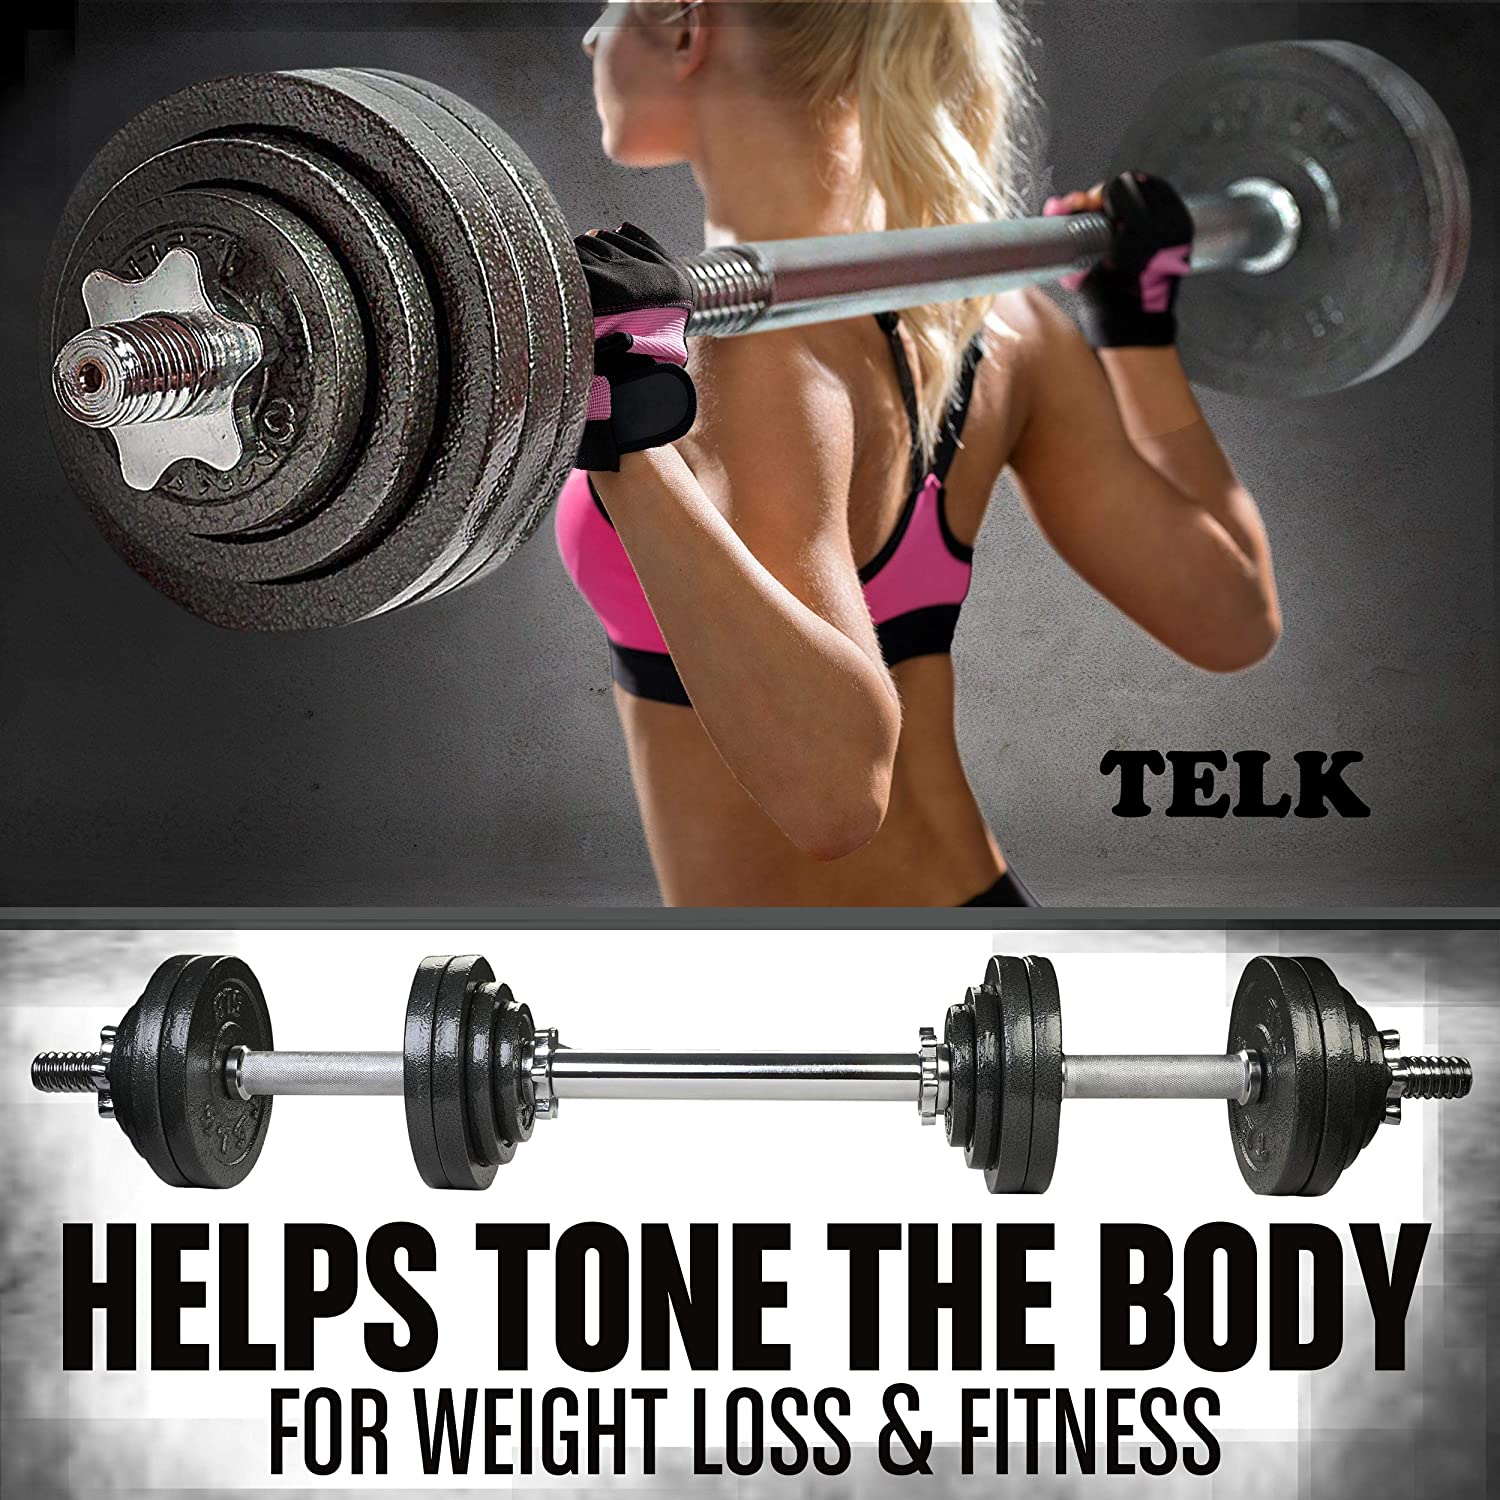 Telk Fitness, Adjustable Dumbbells 65 Lbs., Hand Weights for Home Gym - image 5 of 8